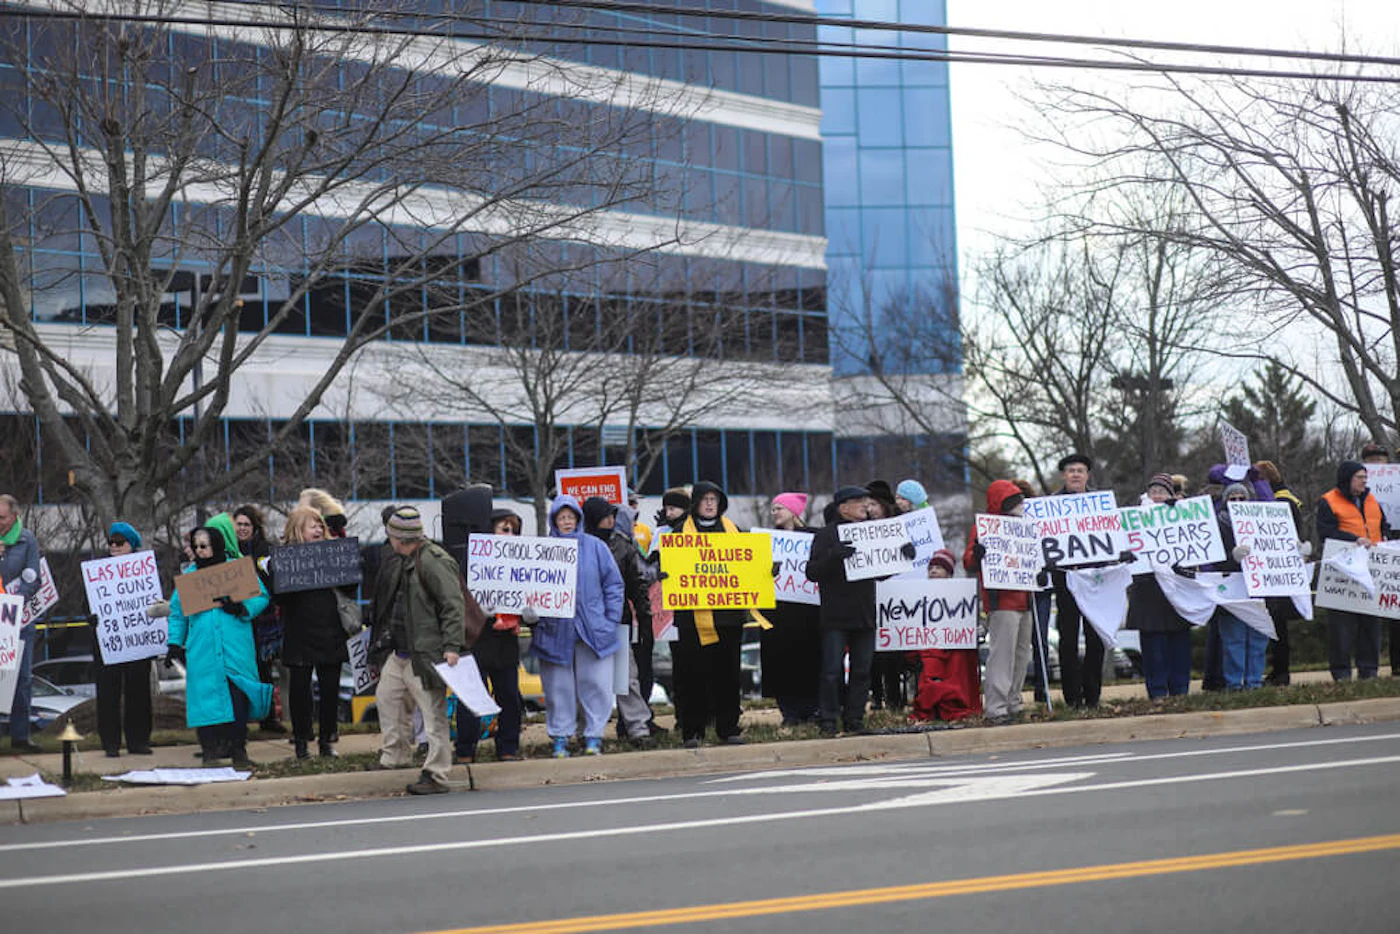 Fairfax, VA - December 14, 2017: Protesters gather outside the National Rifle Association for a vigil on the fifth anniversary of the Sandy Hook Elementary School shooting in Newtown, Connecticut. (Shutterstock)